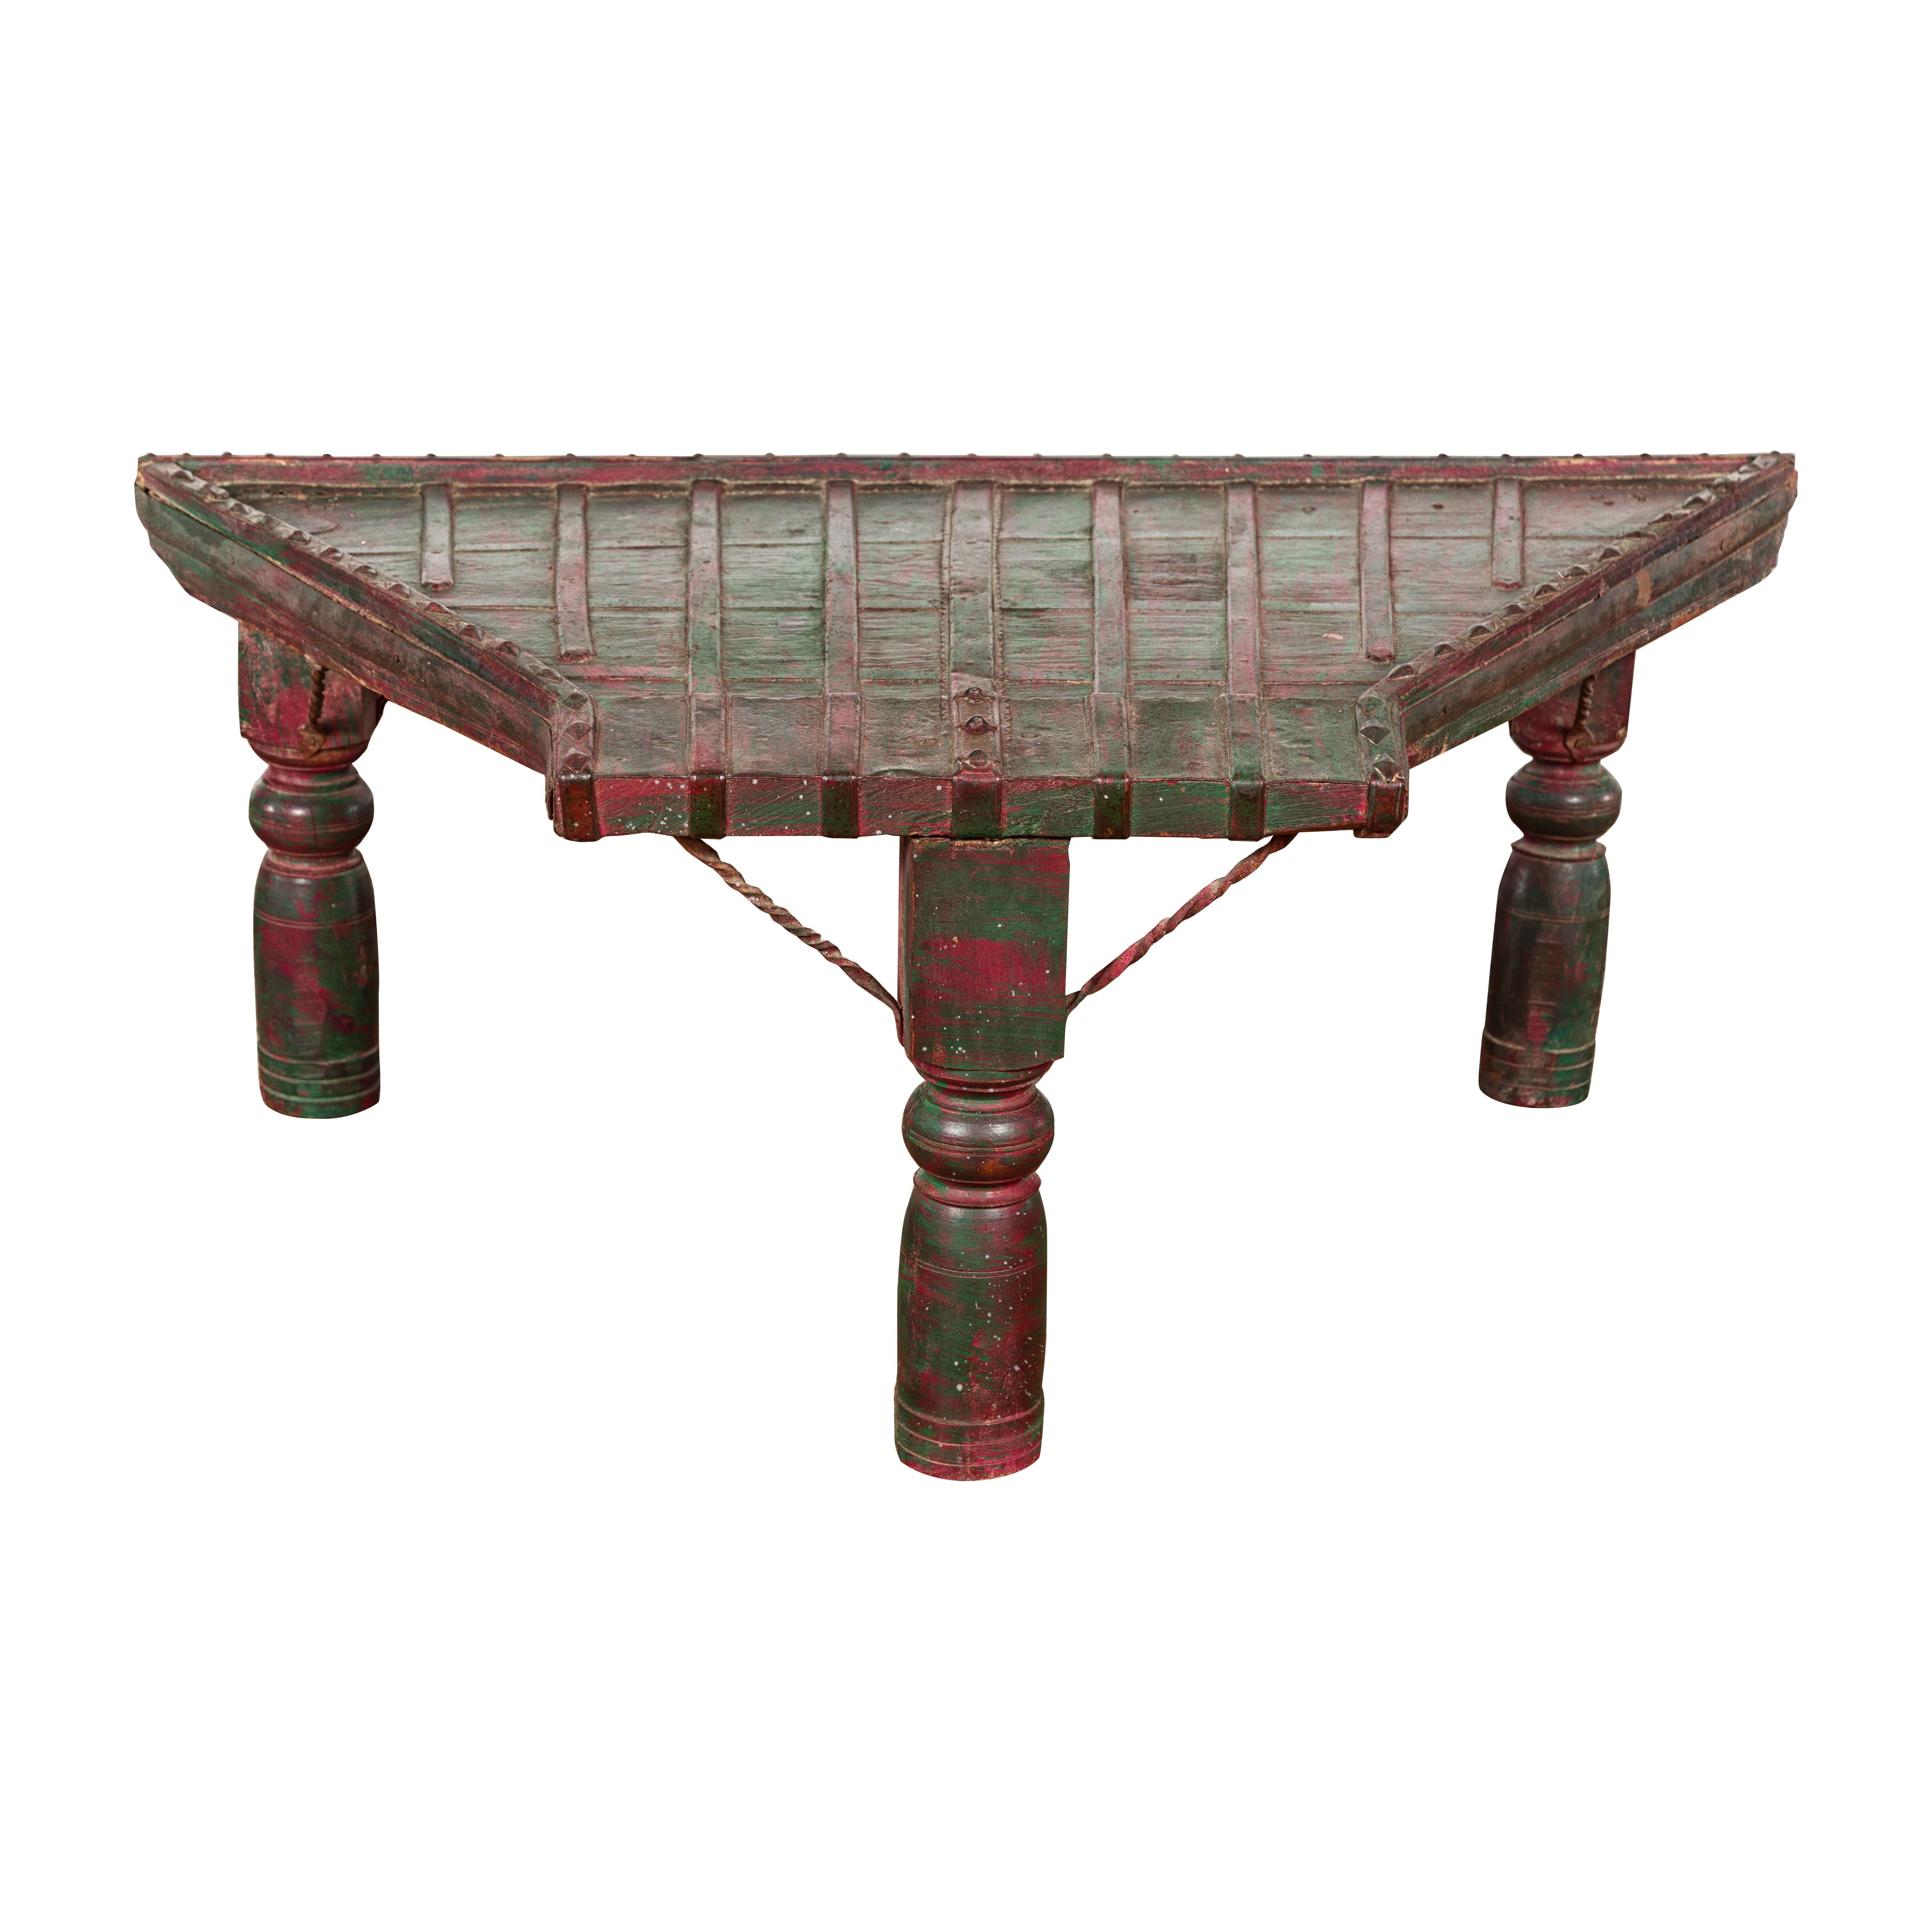 Rustic Coffee Table with Red and Green Lacquer, Turned Baluster Legs and Iron For Sale 11